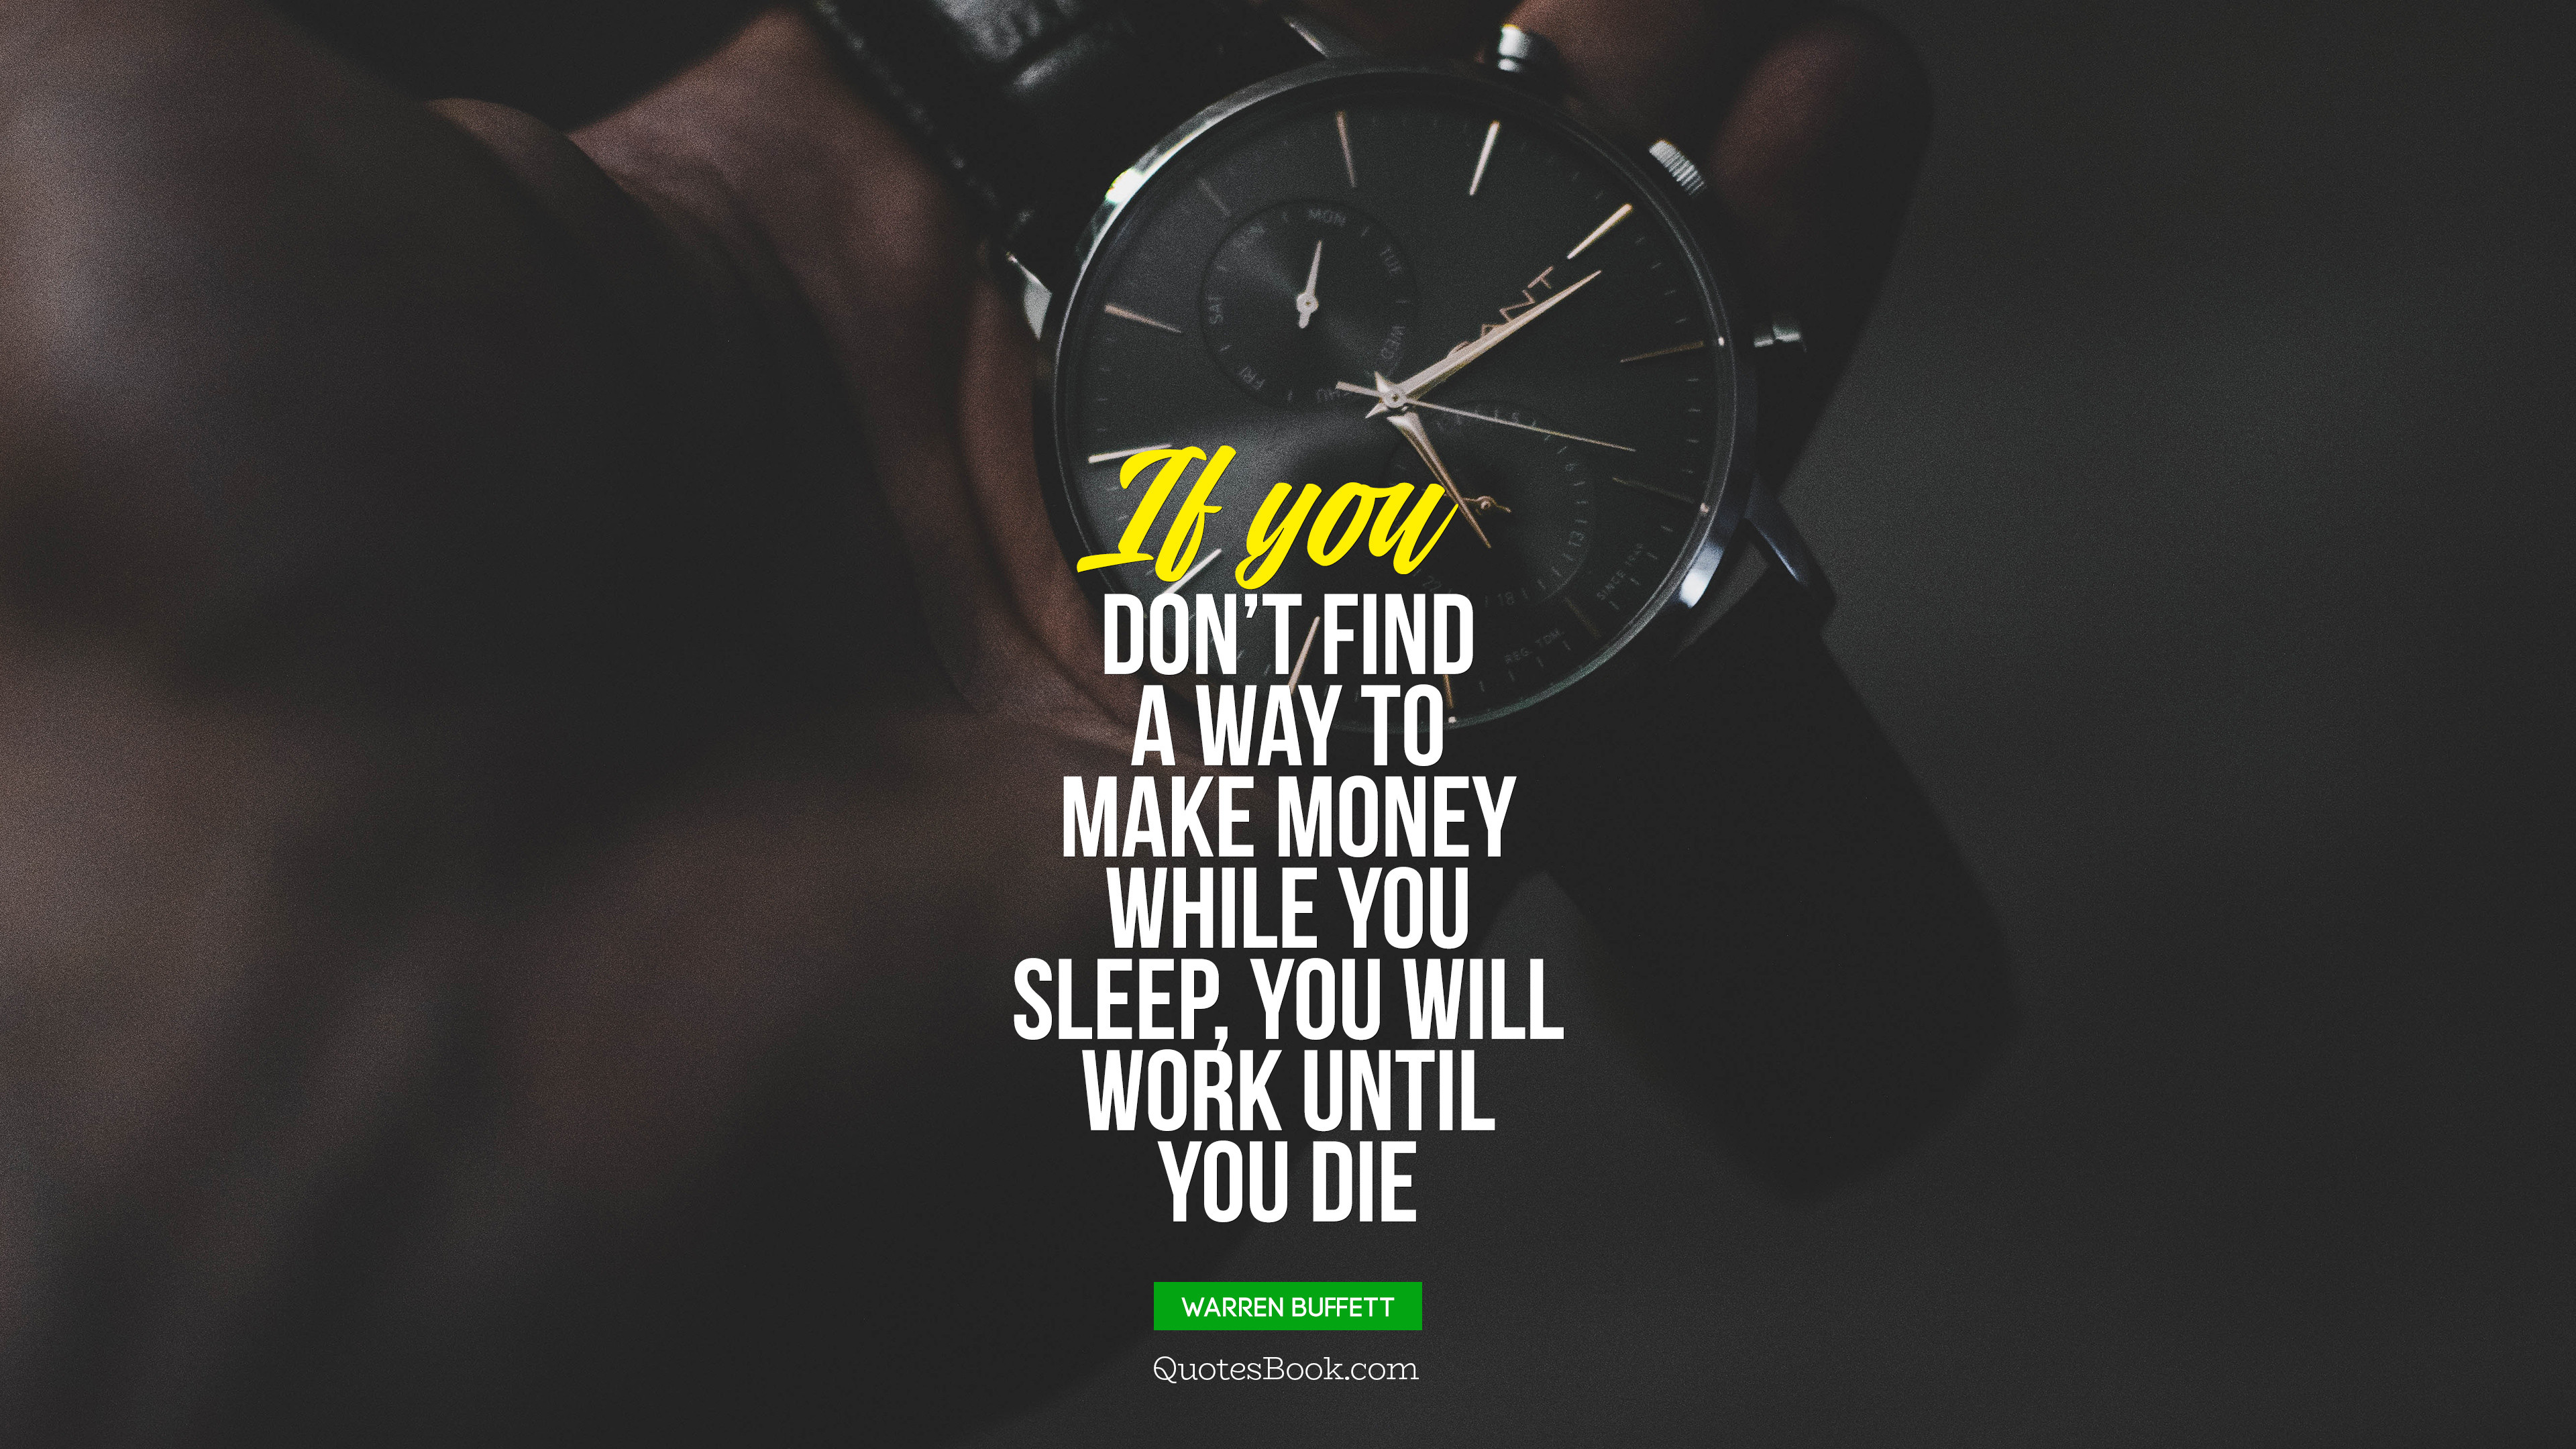 If you don't find a way to make money while you sleep, you will work until  you die. - Quote by Warren Buffett - QuotesBook